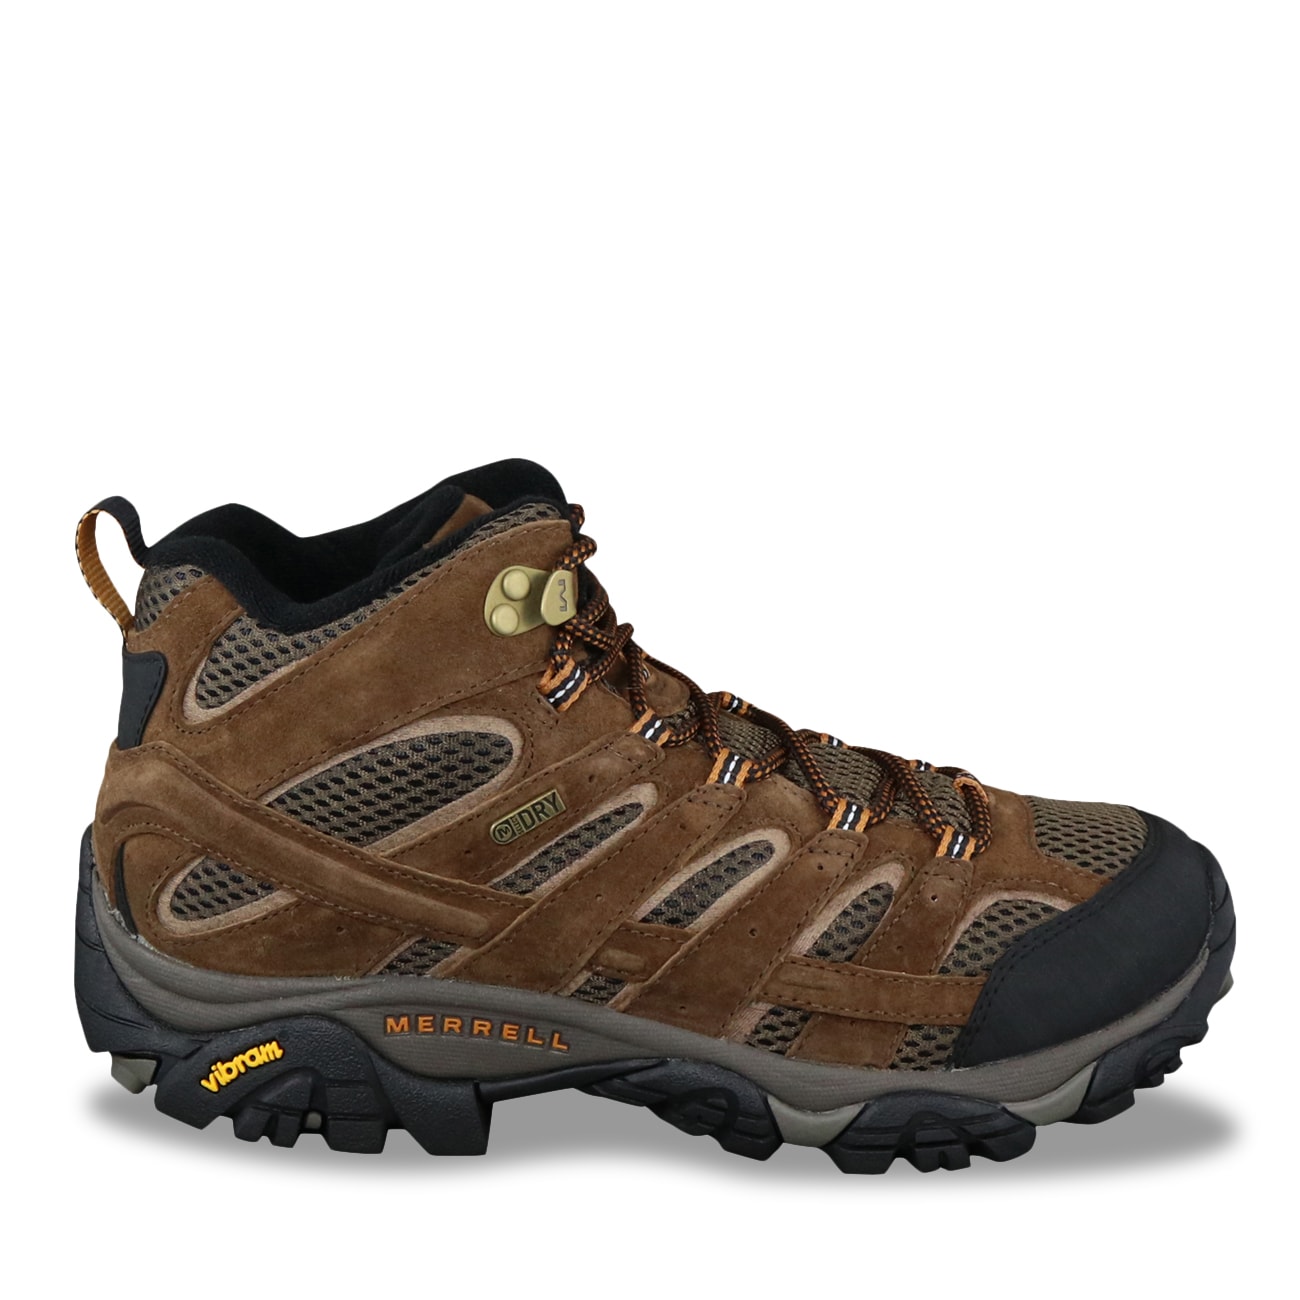 extra wide waterproof hiking boots